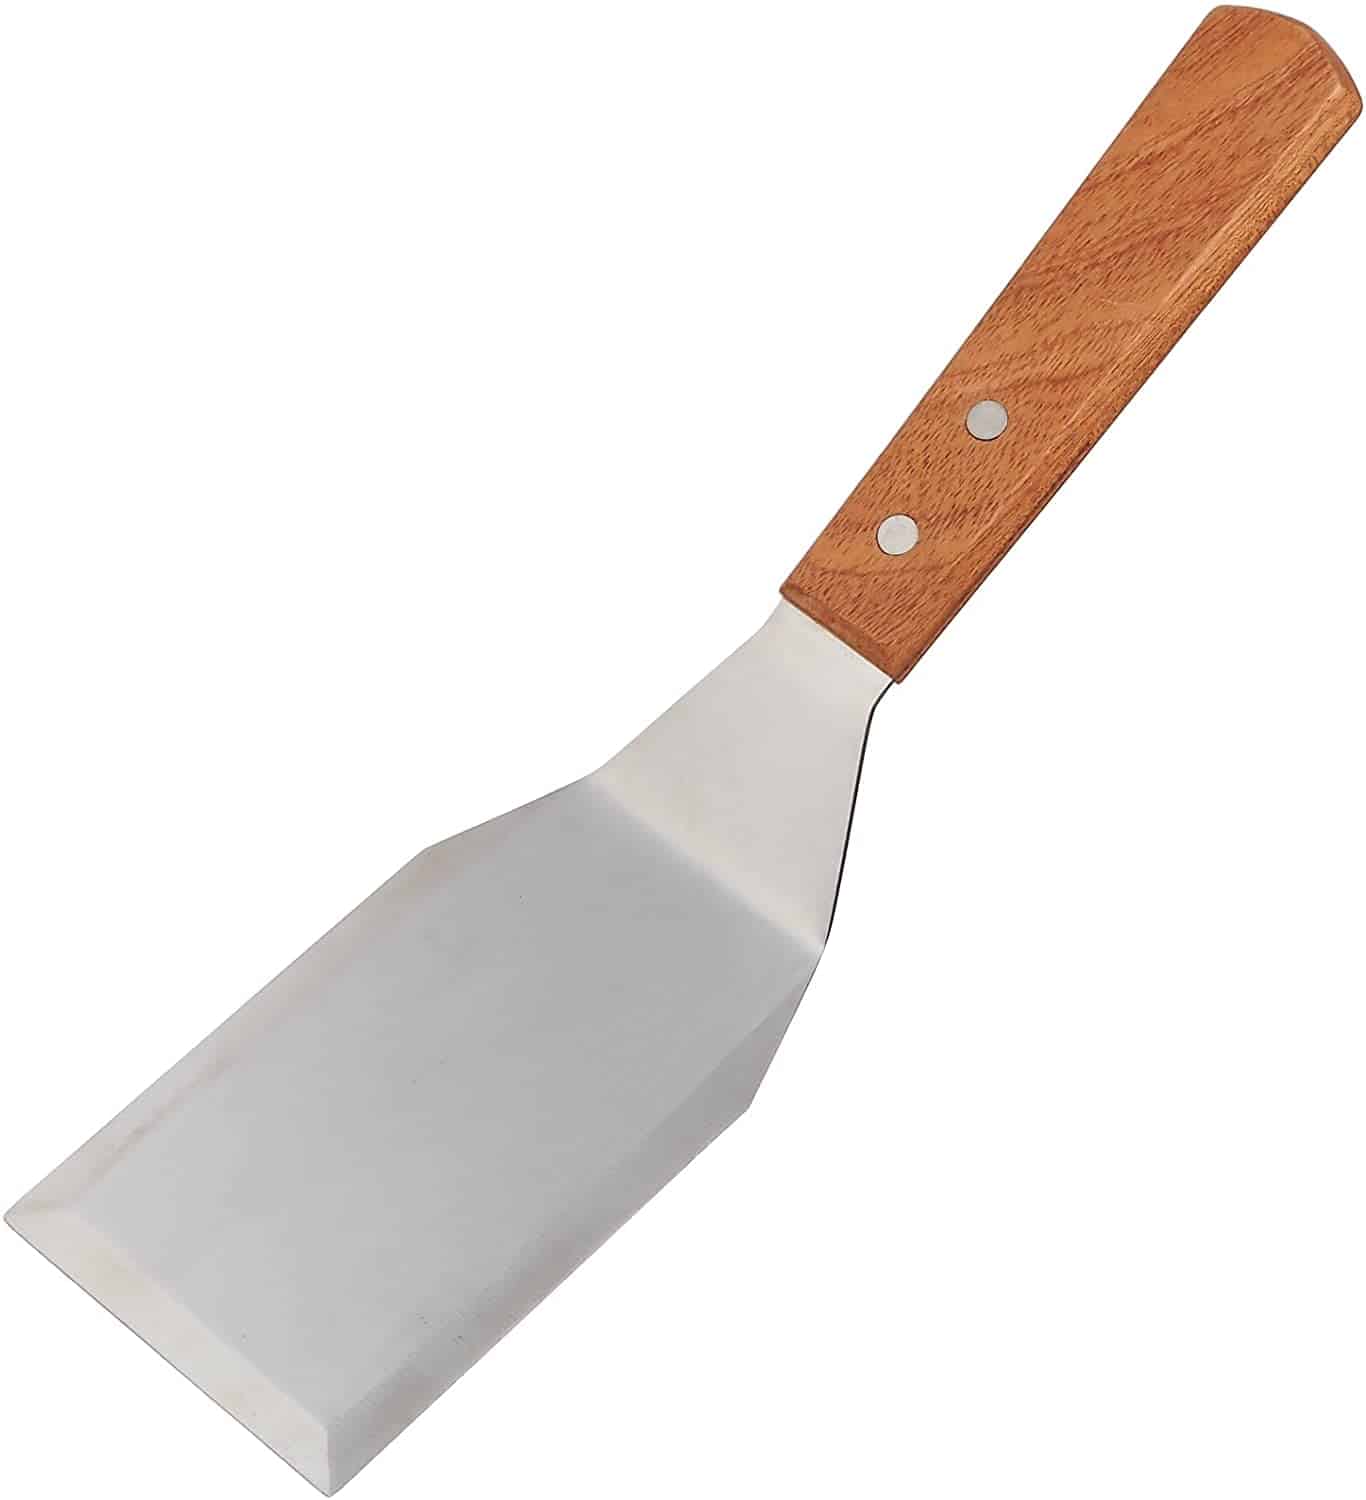 Best budget spatula for pancakes: Winco TN719 Blade Turner